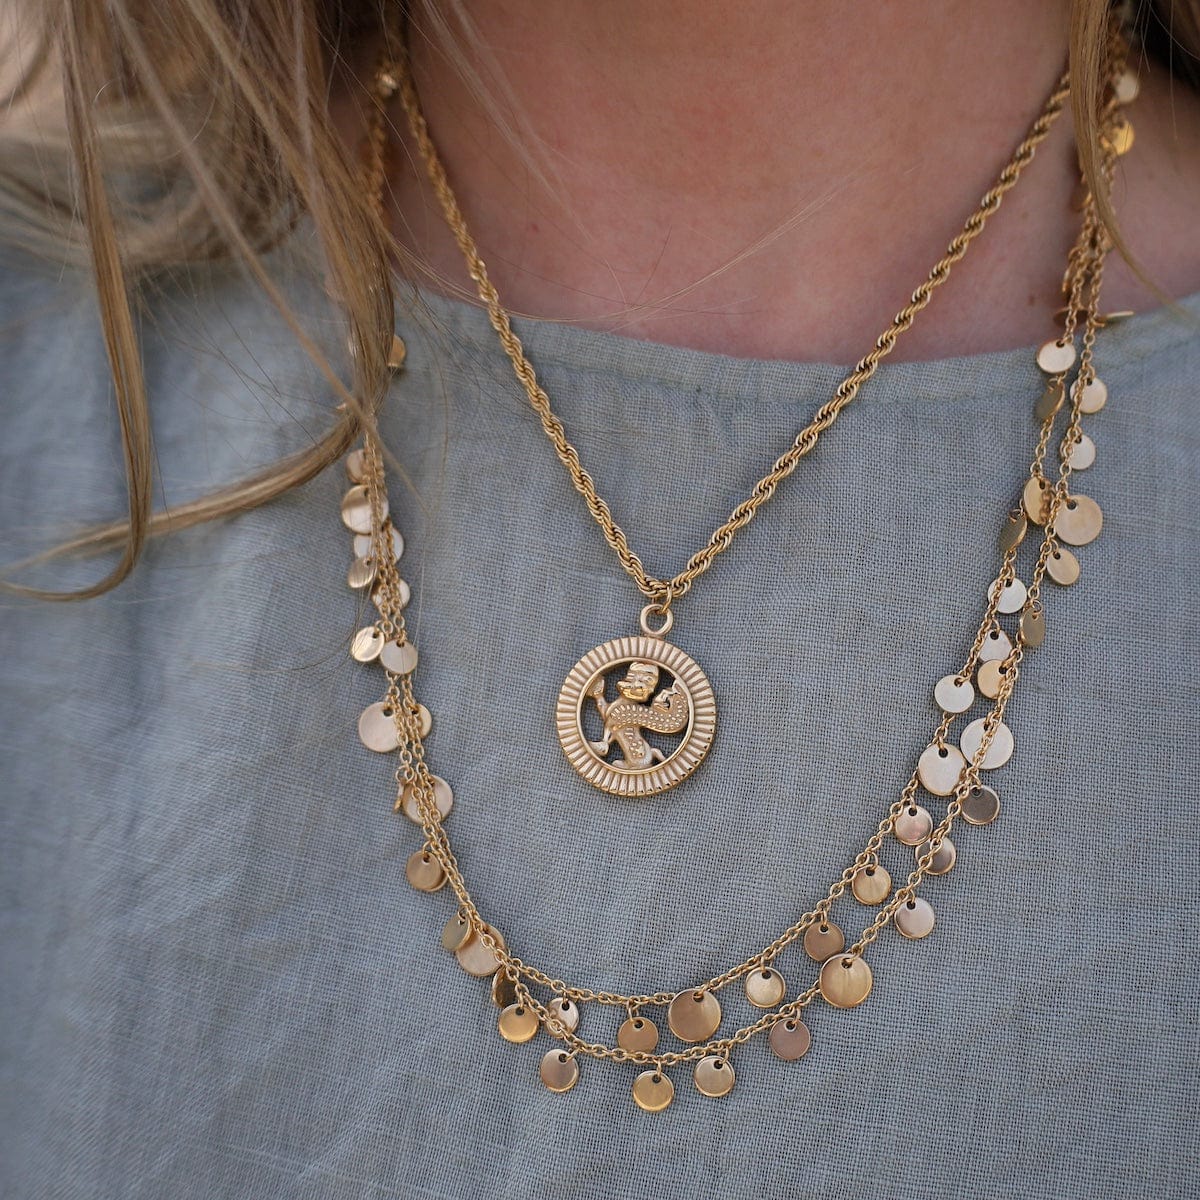 NKL-GPL KALI // The Long Chain with Discs - 18k gold plate